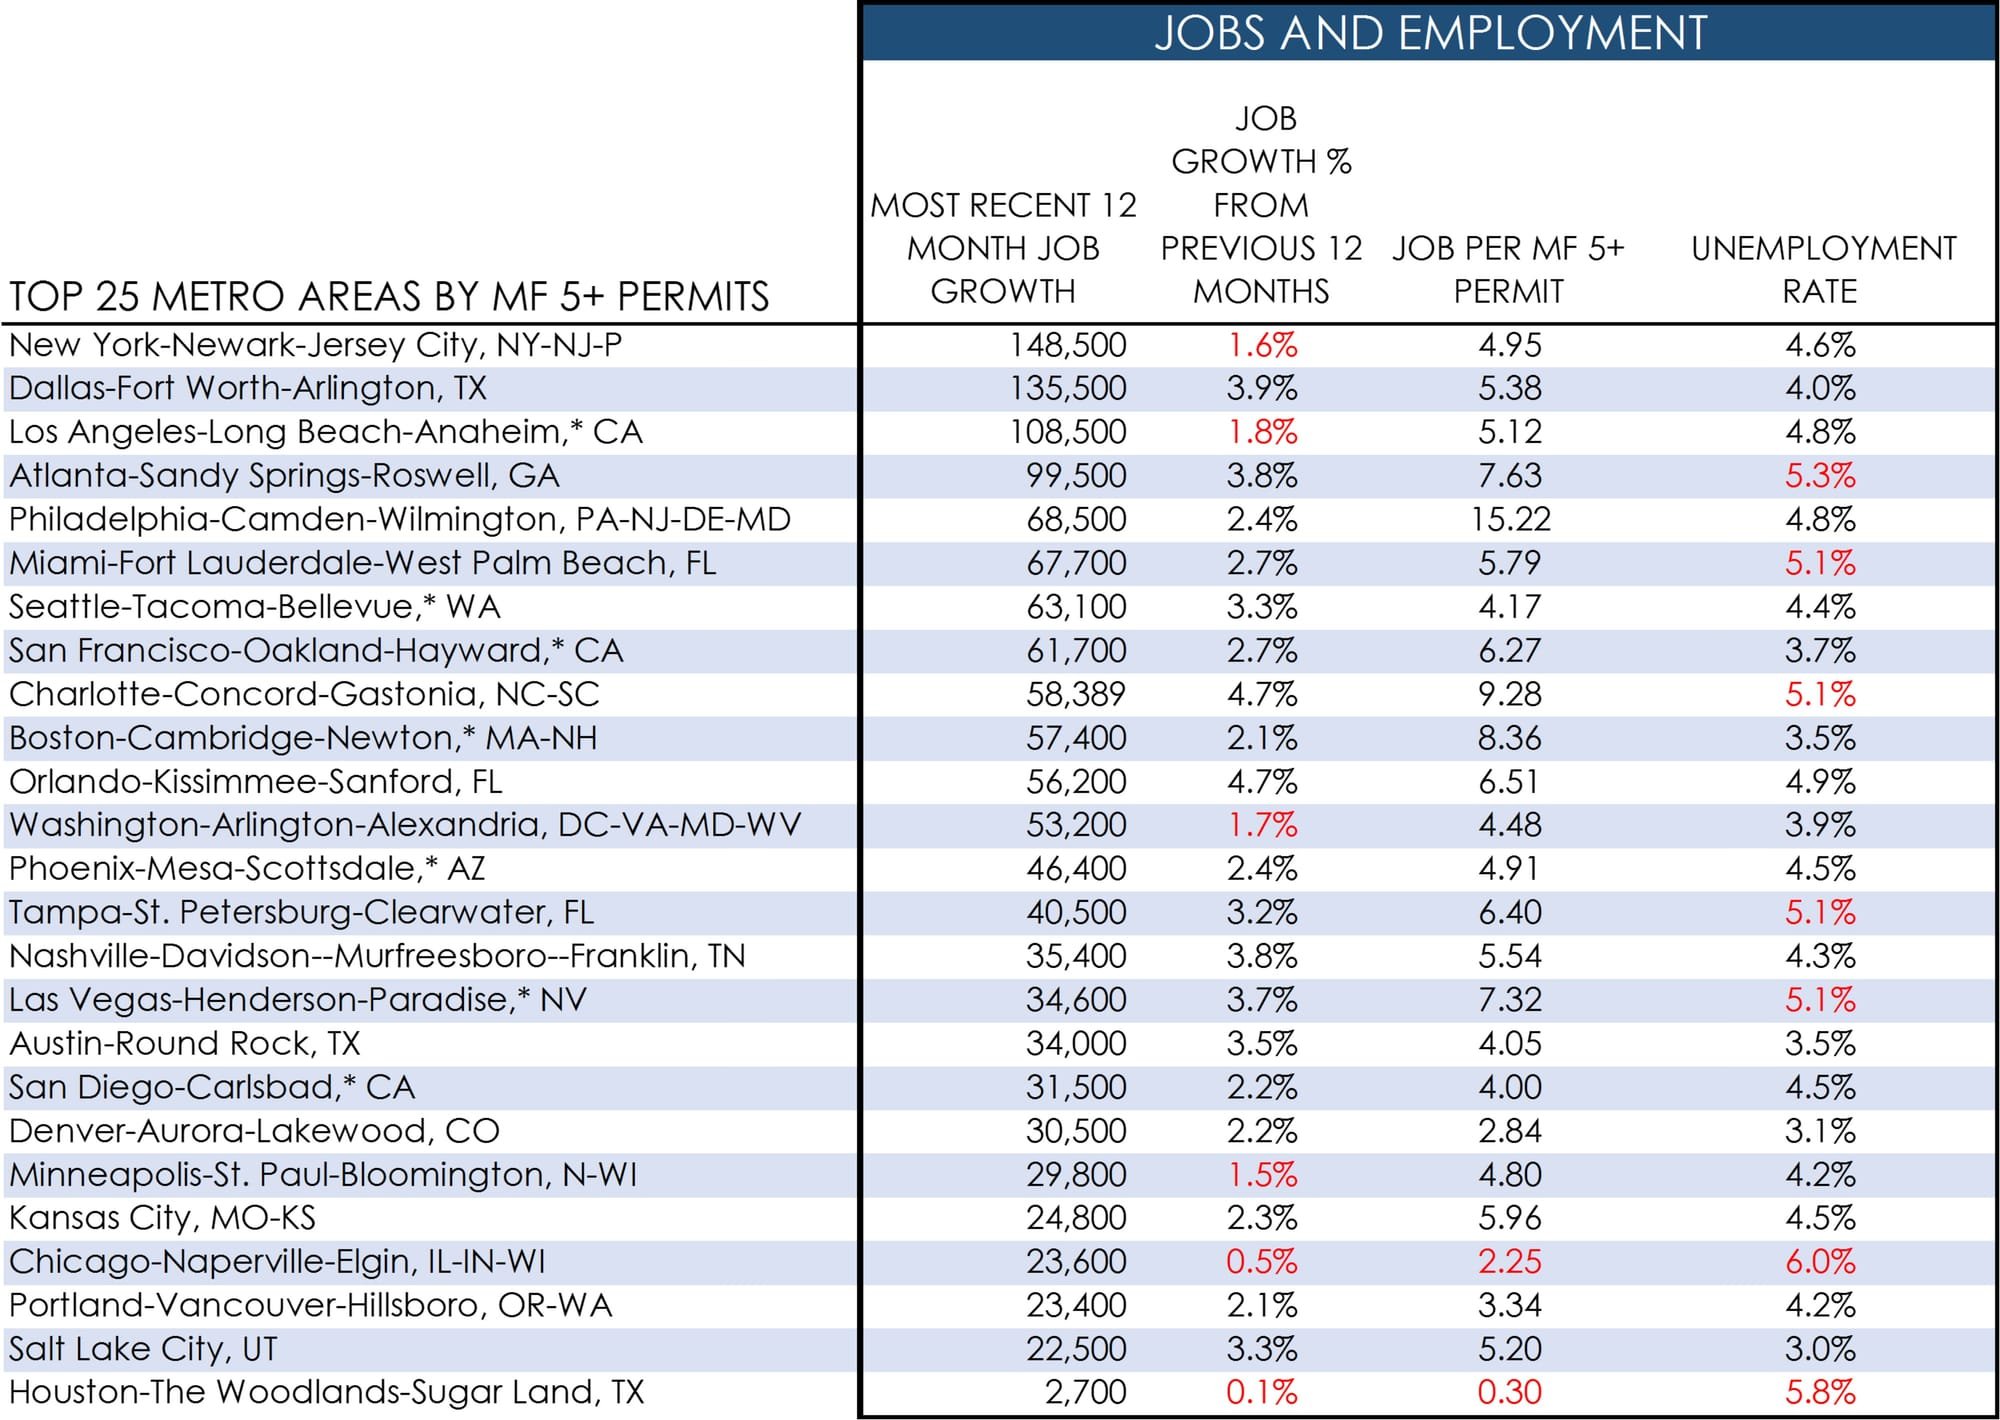 Jobs and Employment